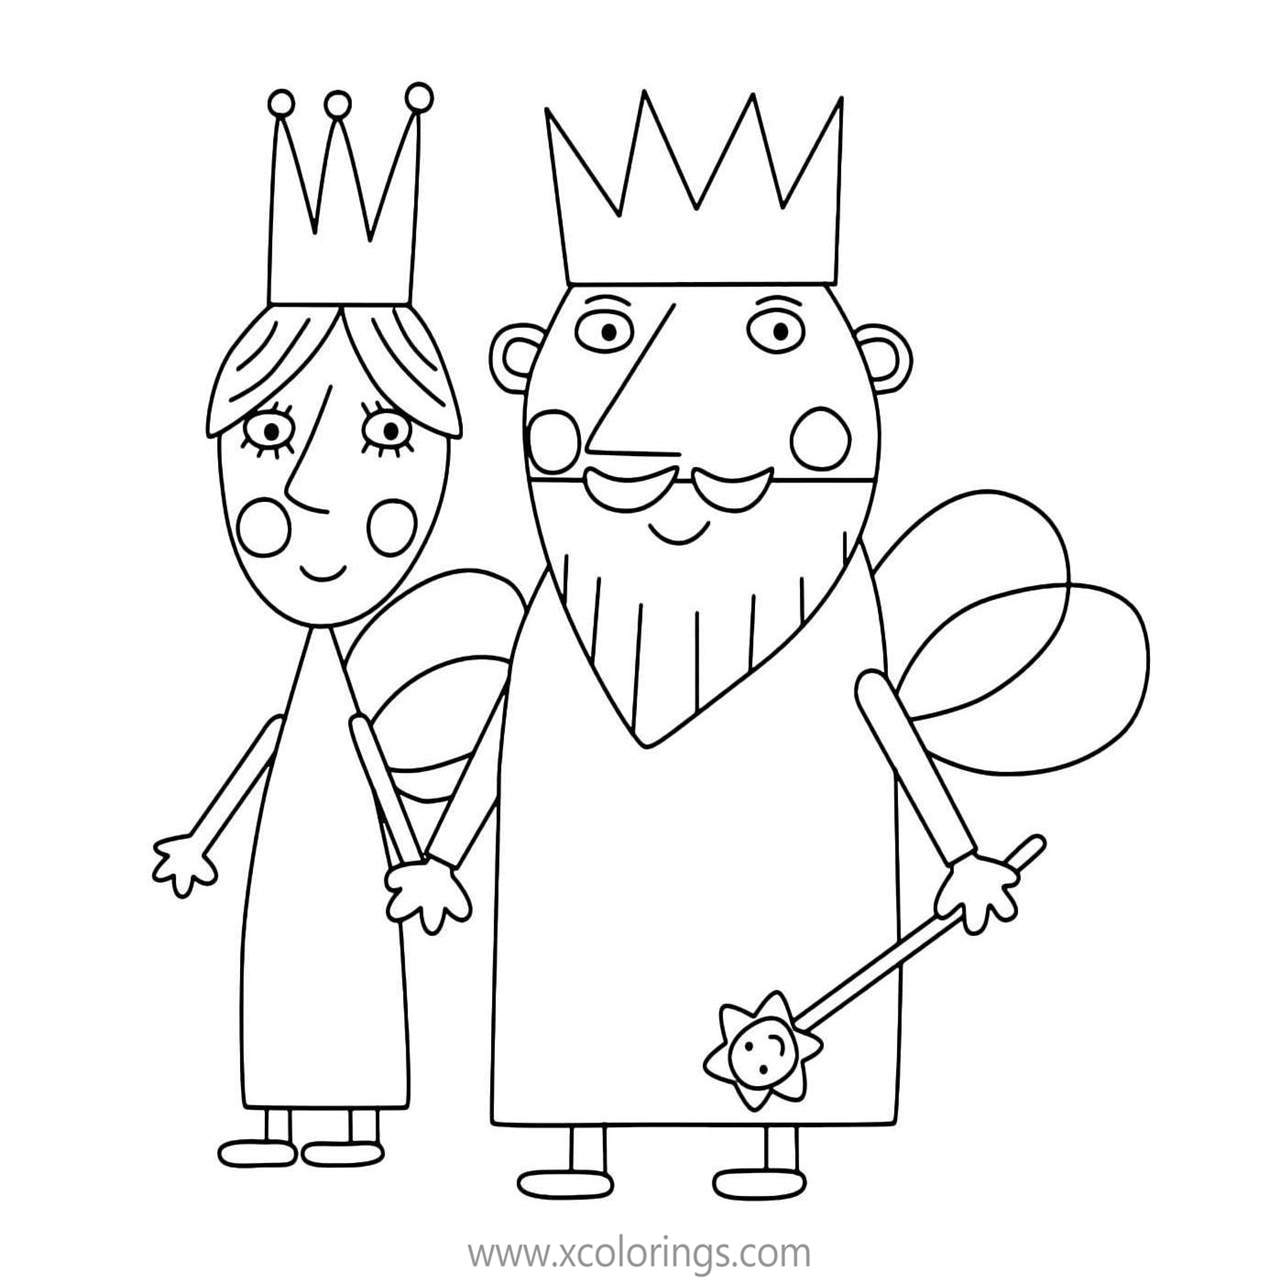 Free Ben And Holly Coloring Pages King and Queen printable